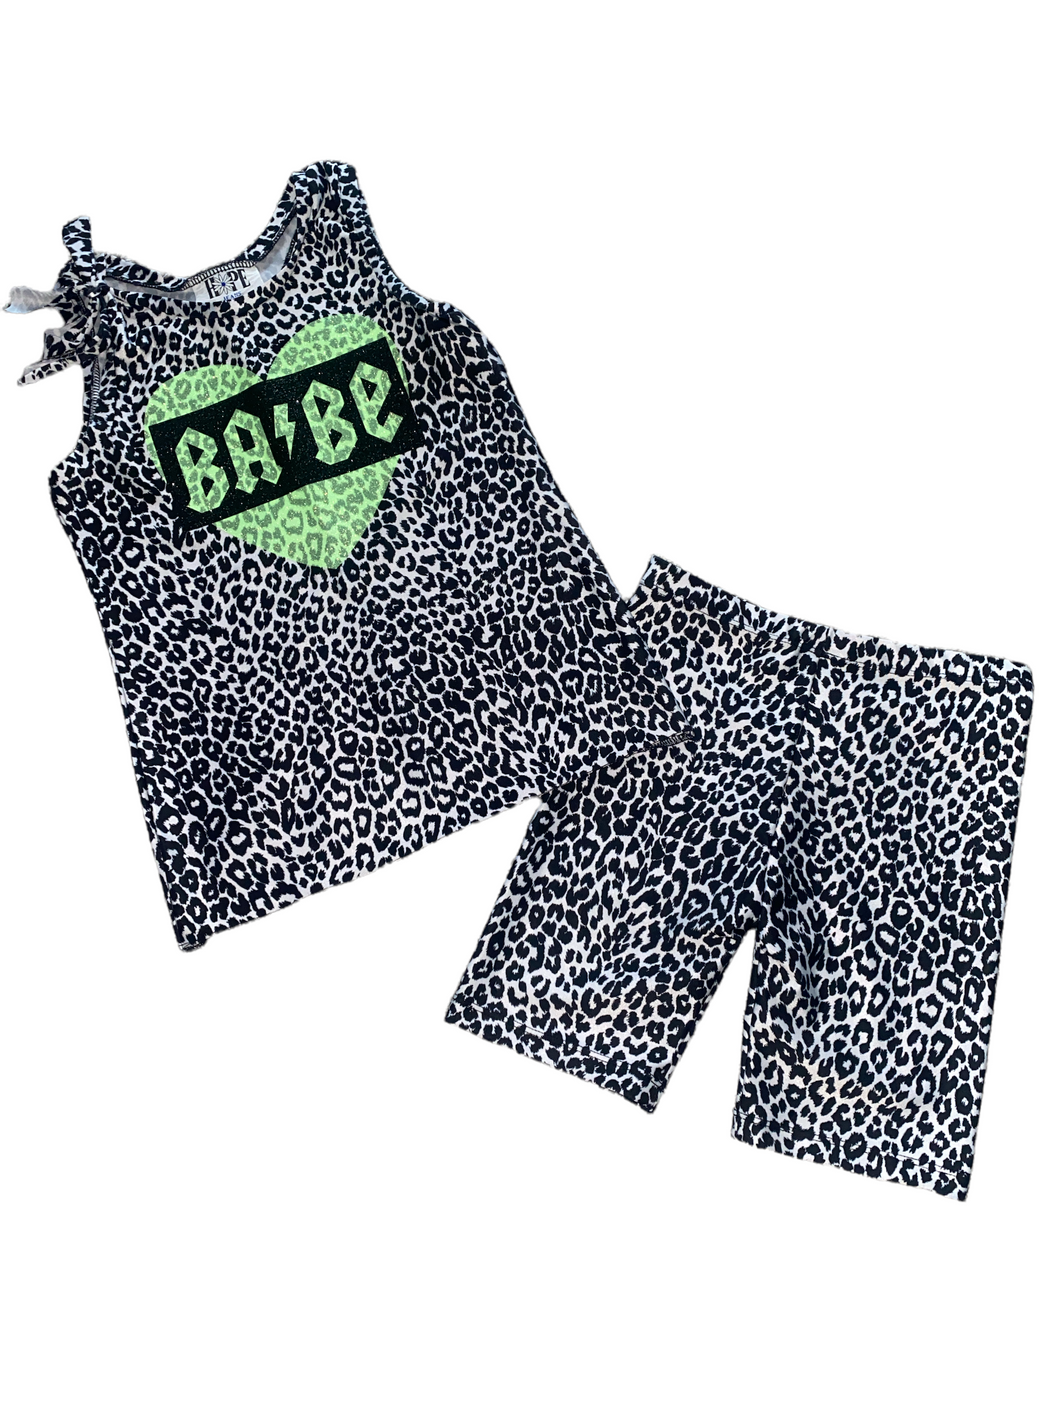 Hope Jeans girls 2pc snow leopard print Babe glitter heart tank and shorts set 10